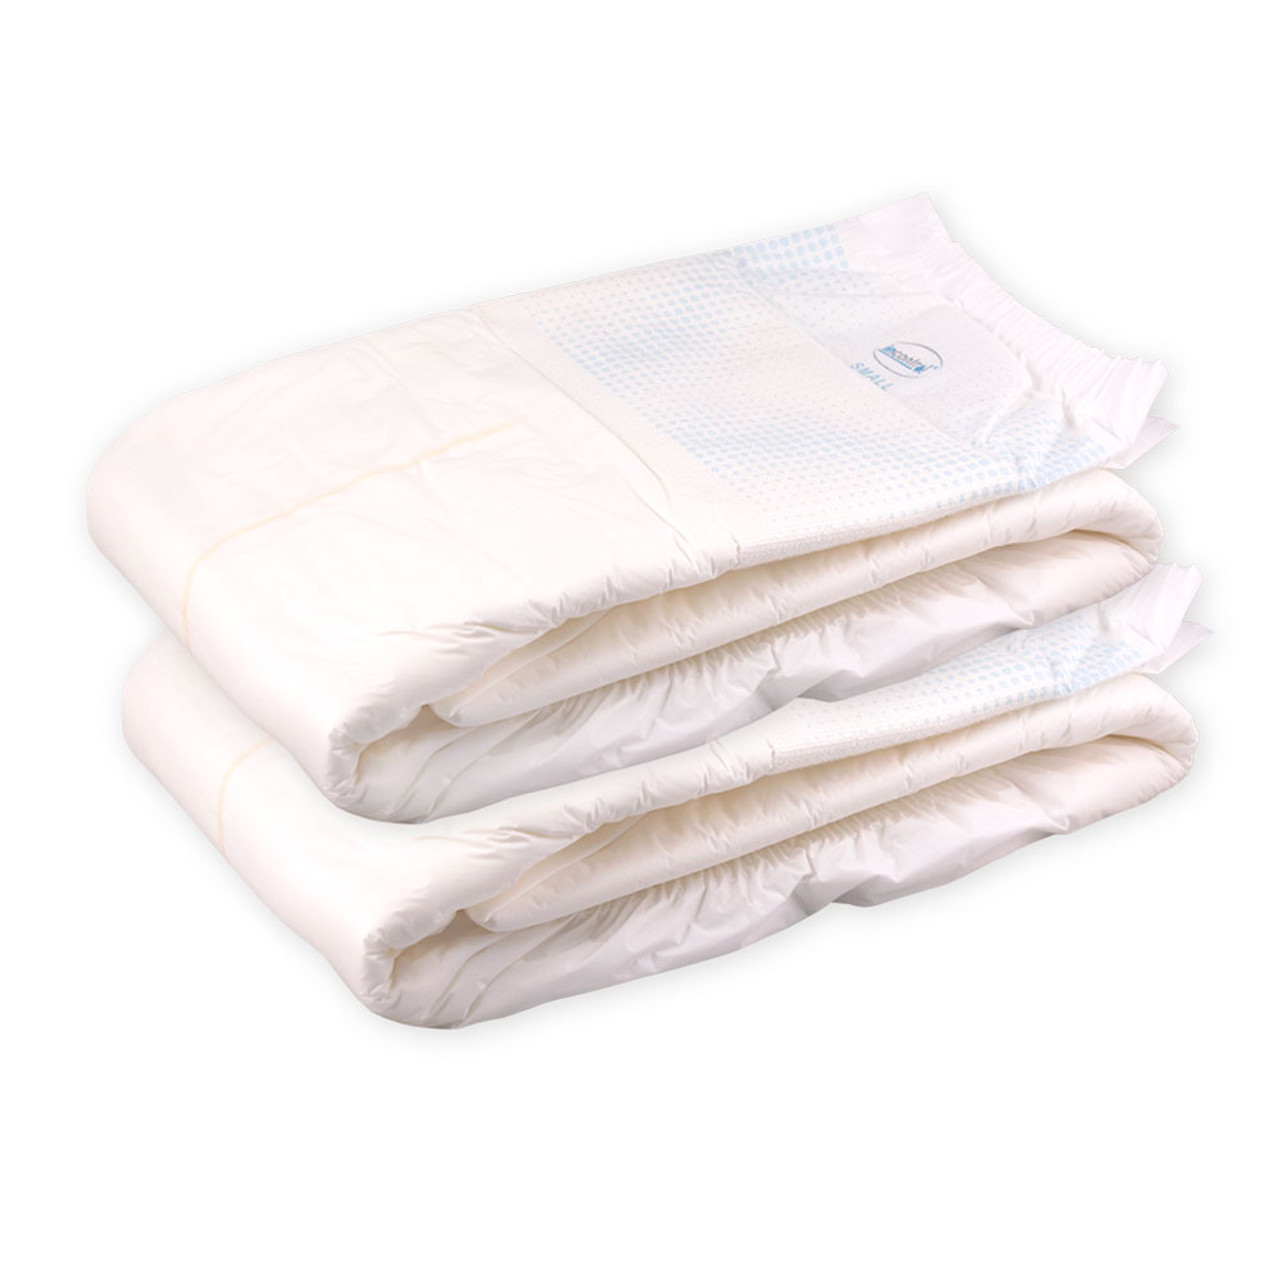 Rearz Products - Incontrol Diapers